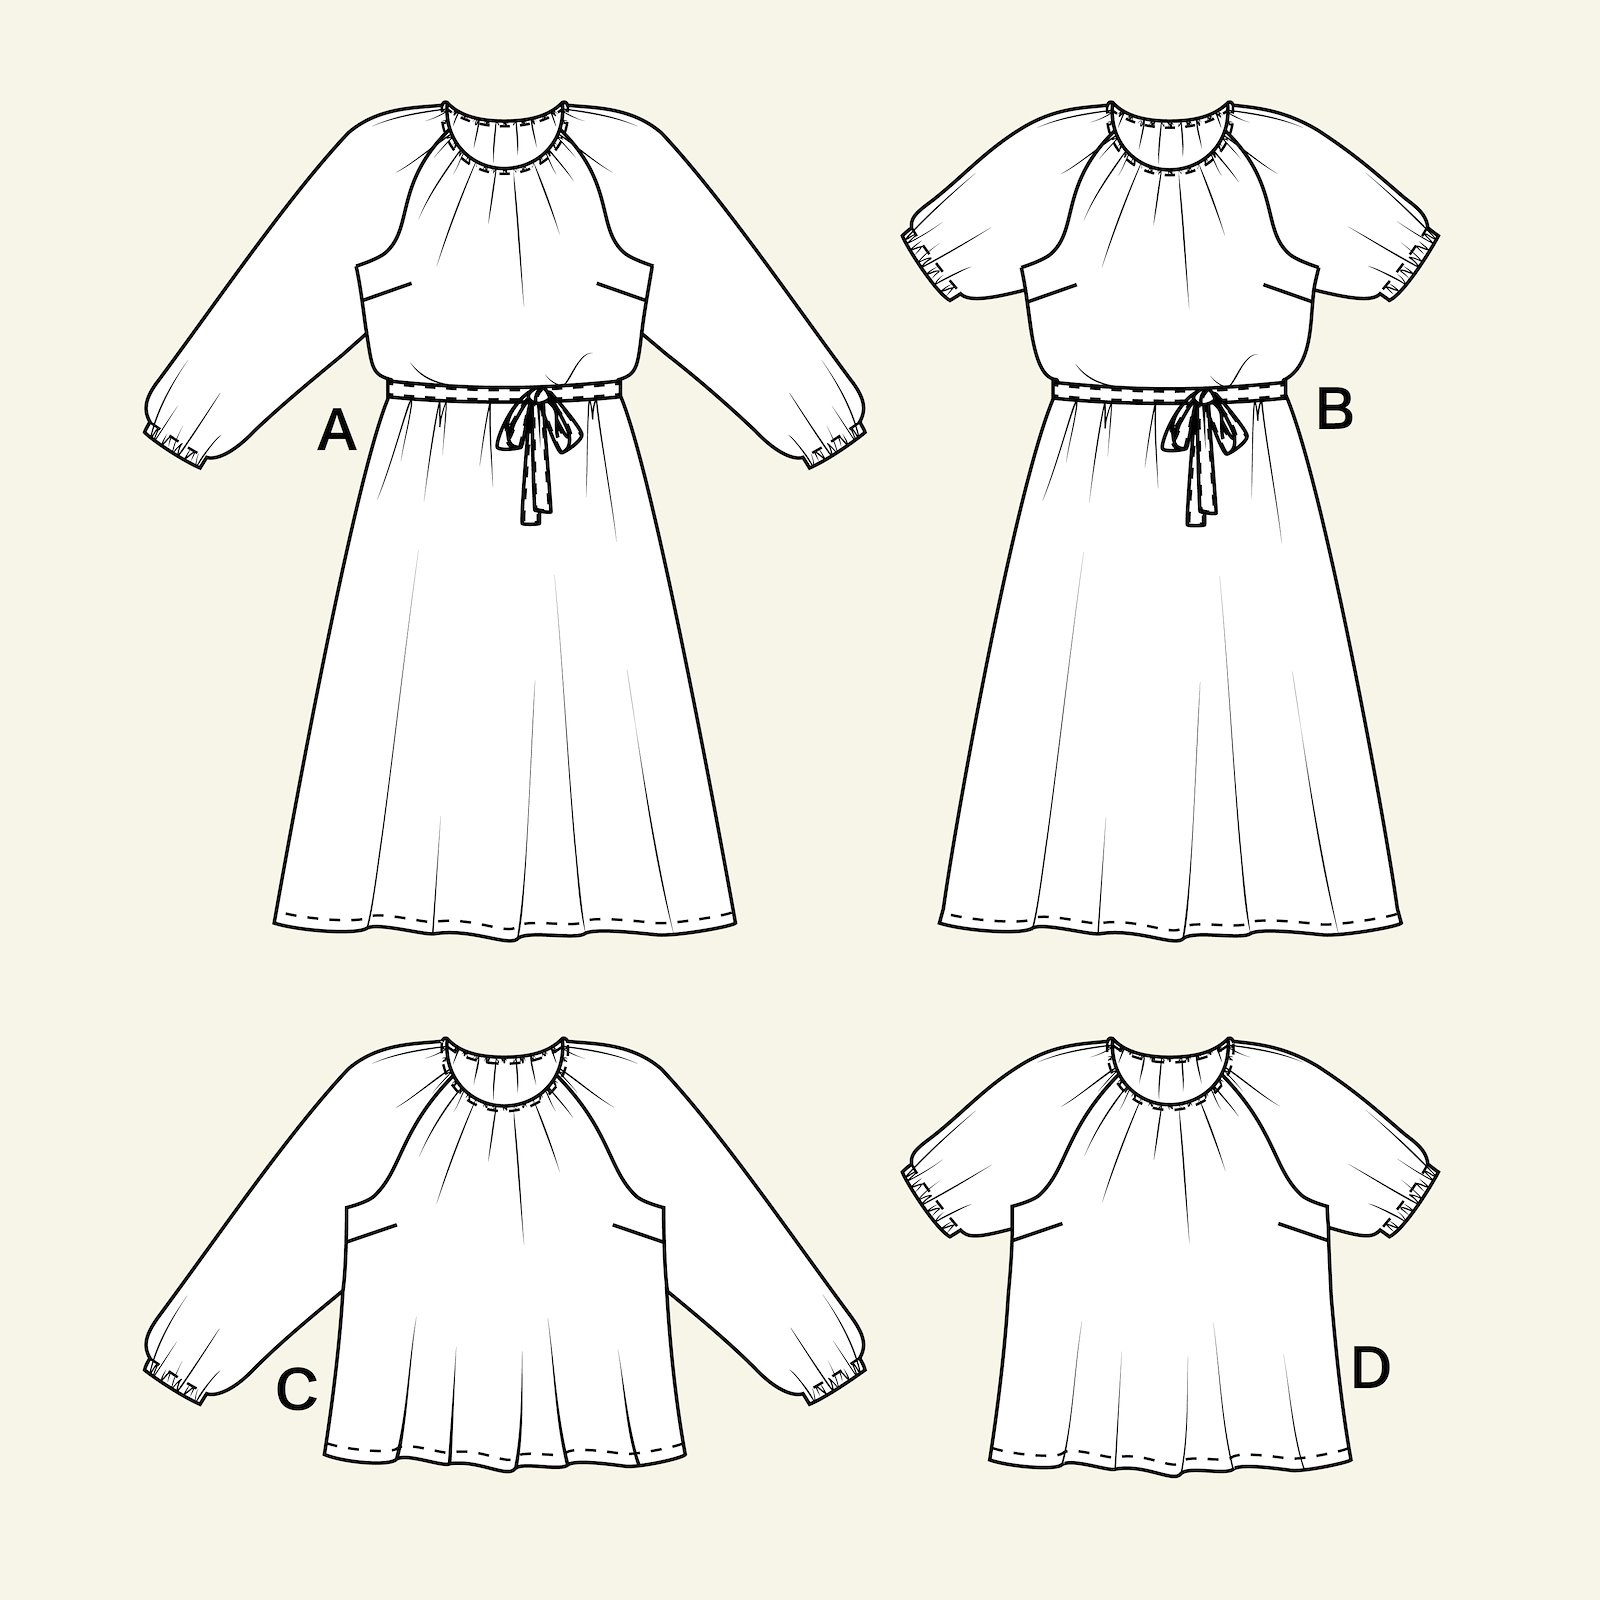 Dress with belt and blouse, 40/12 p23167000_p23167001_p23167002_p23167003_p23167004_pack_b.png